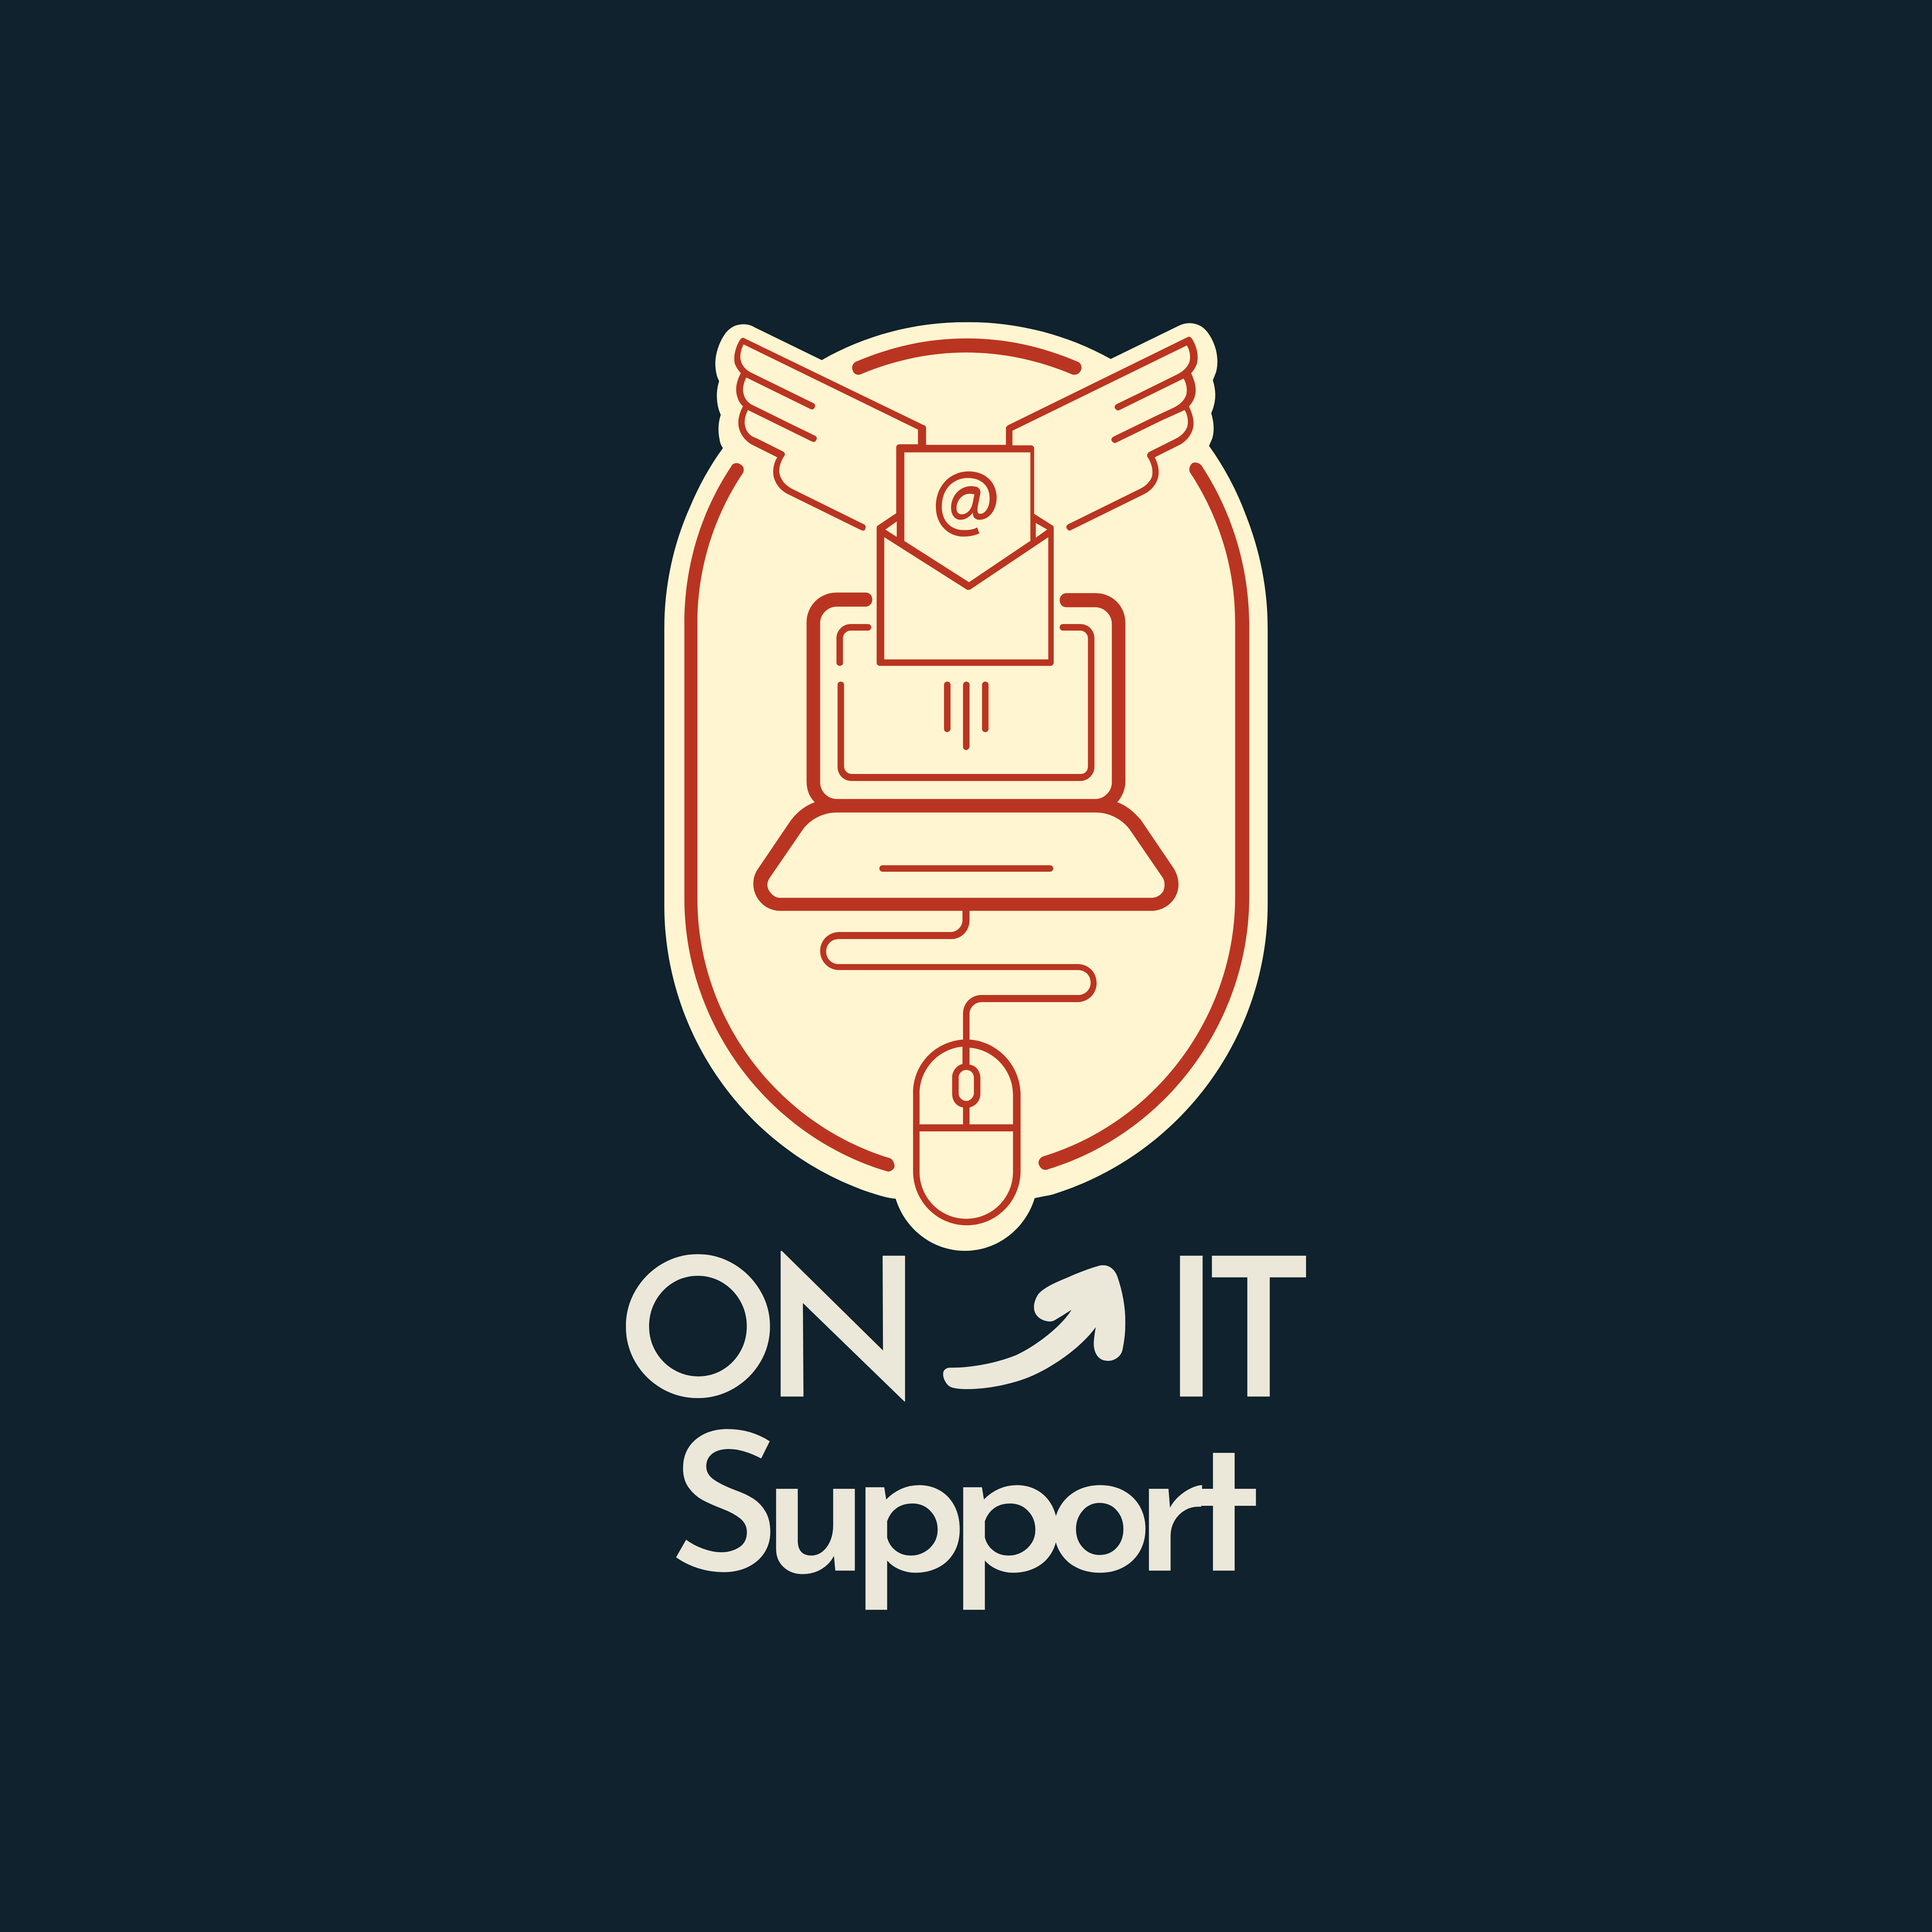 ON-IT Support Logo